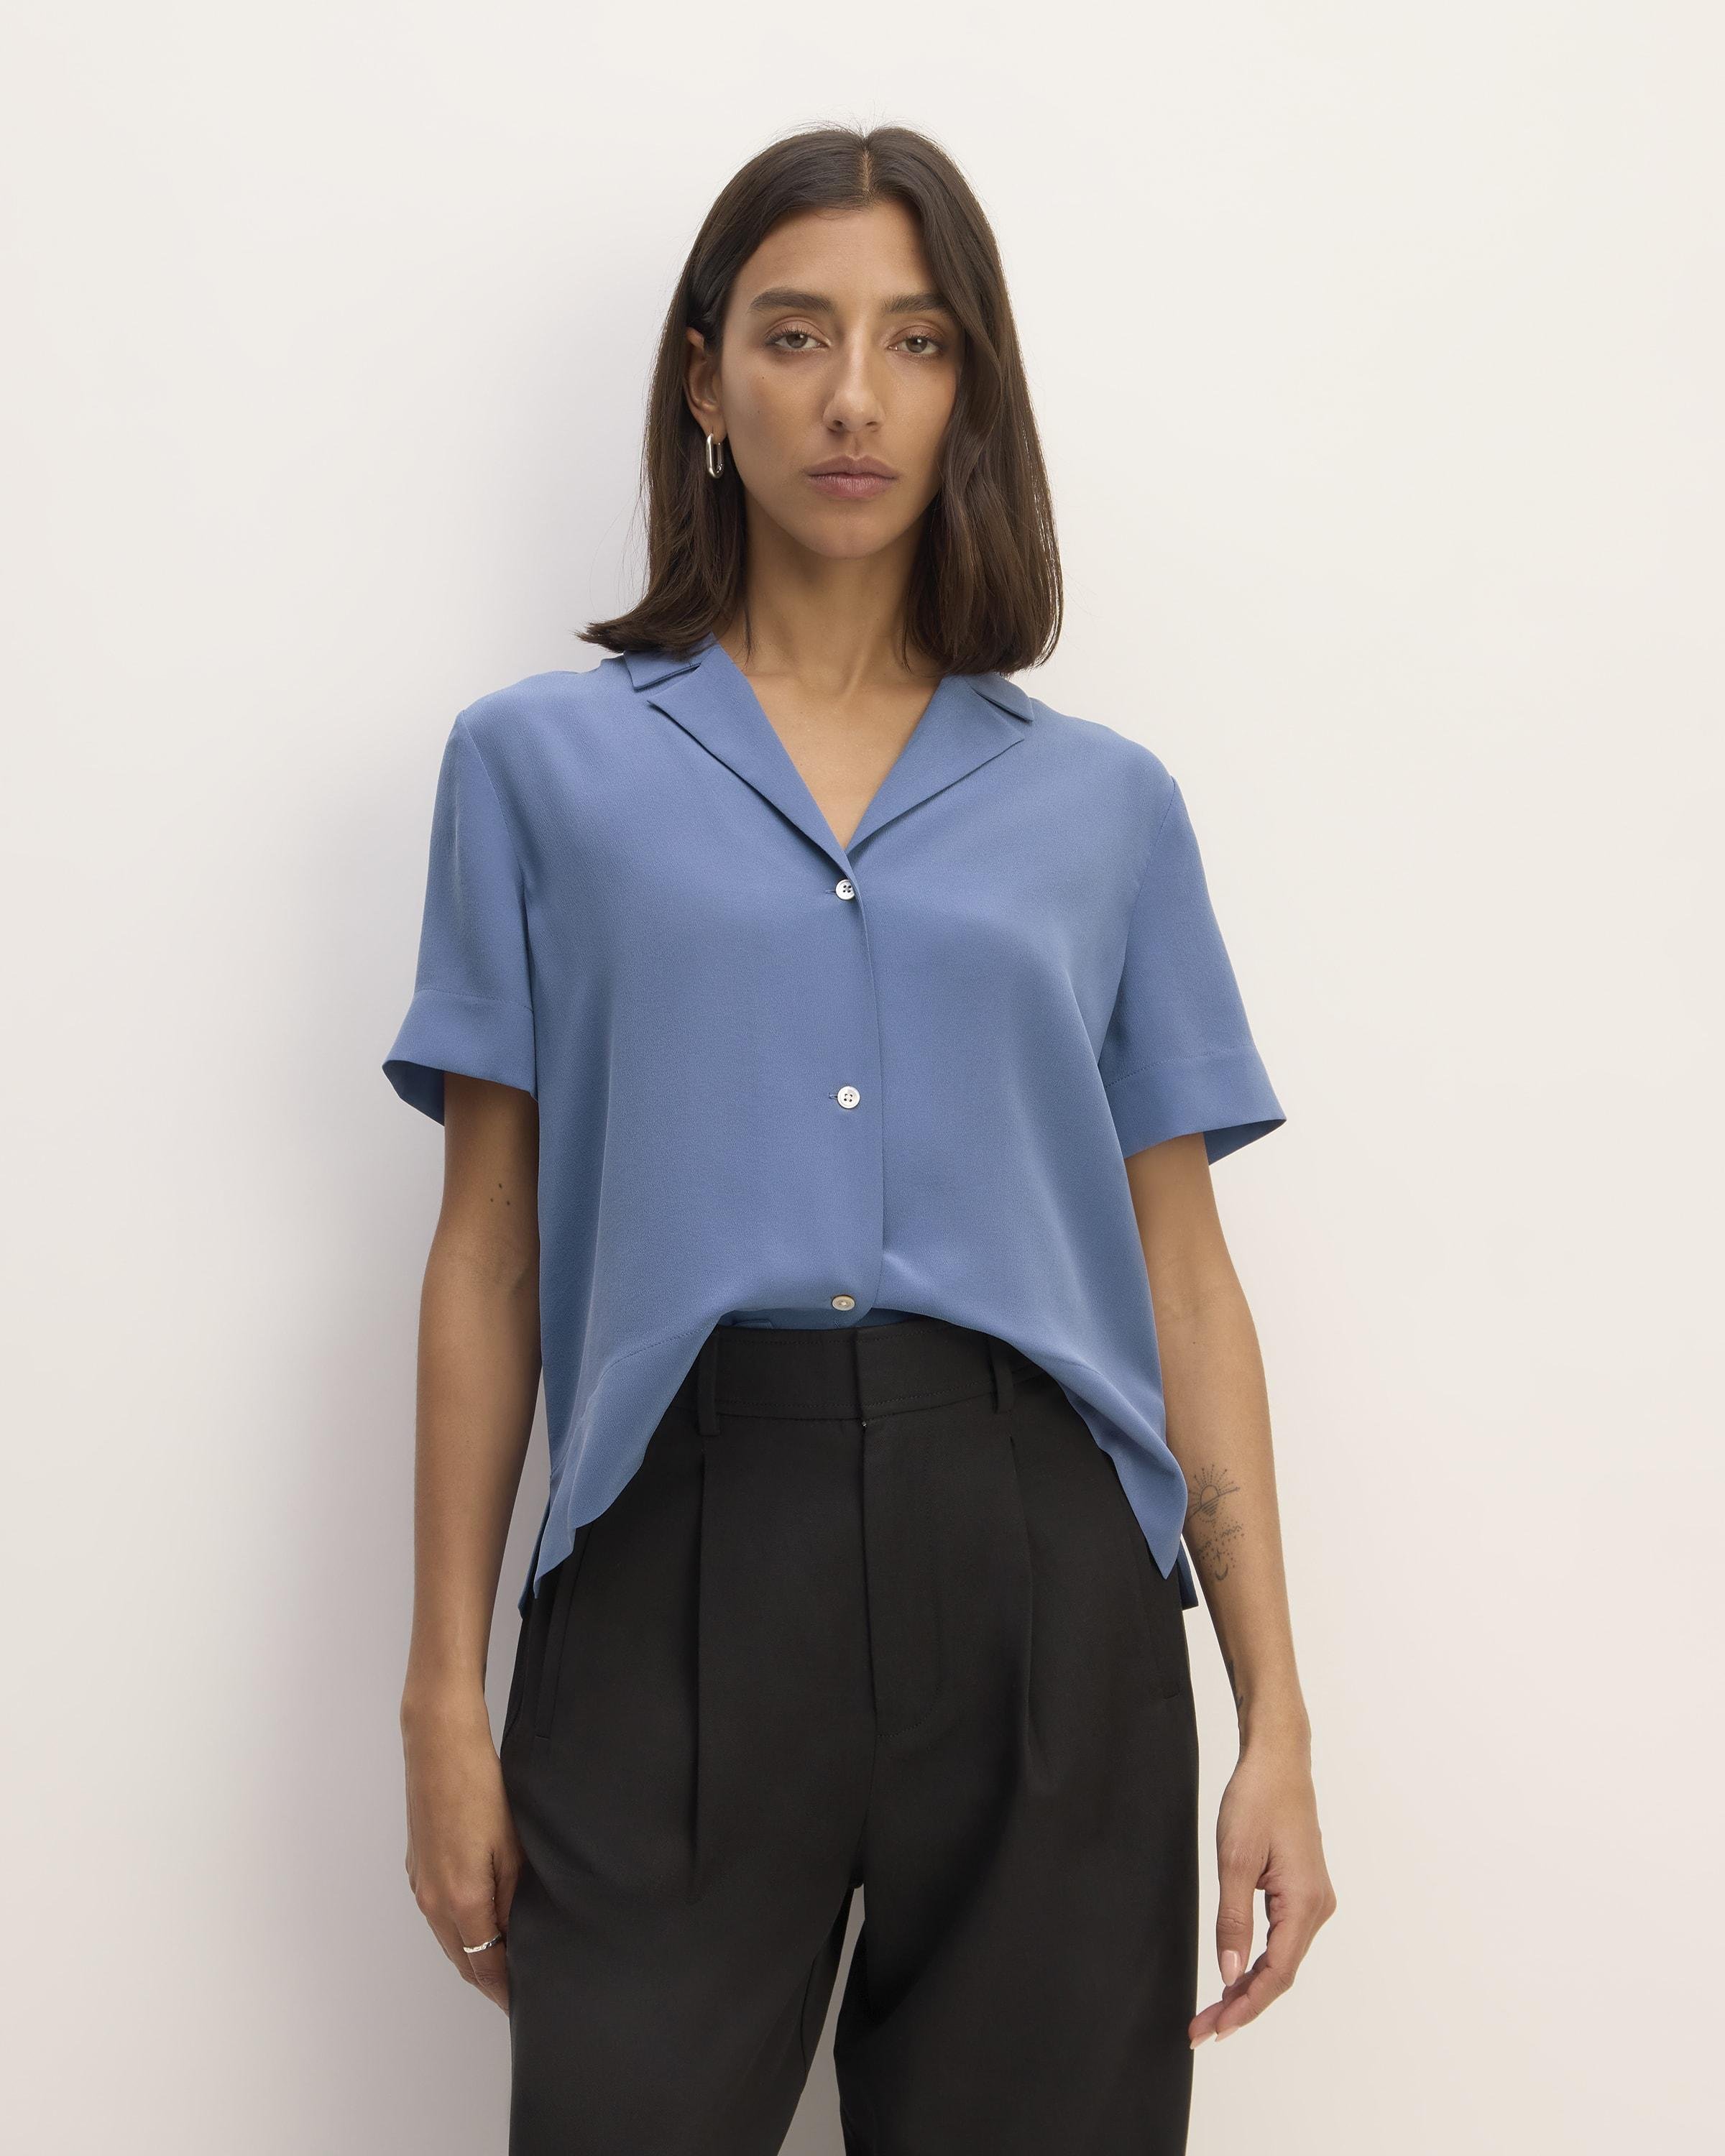 The Washable Clean Silk Short-Sleeve Notch Shirt by EVERLANE